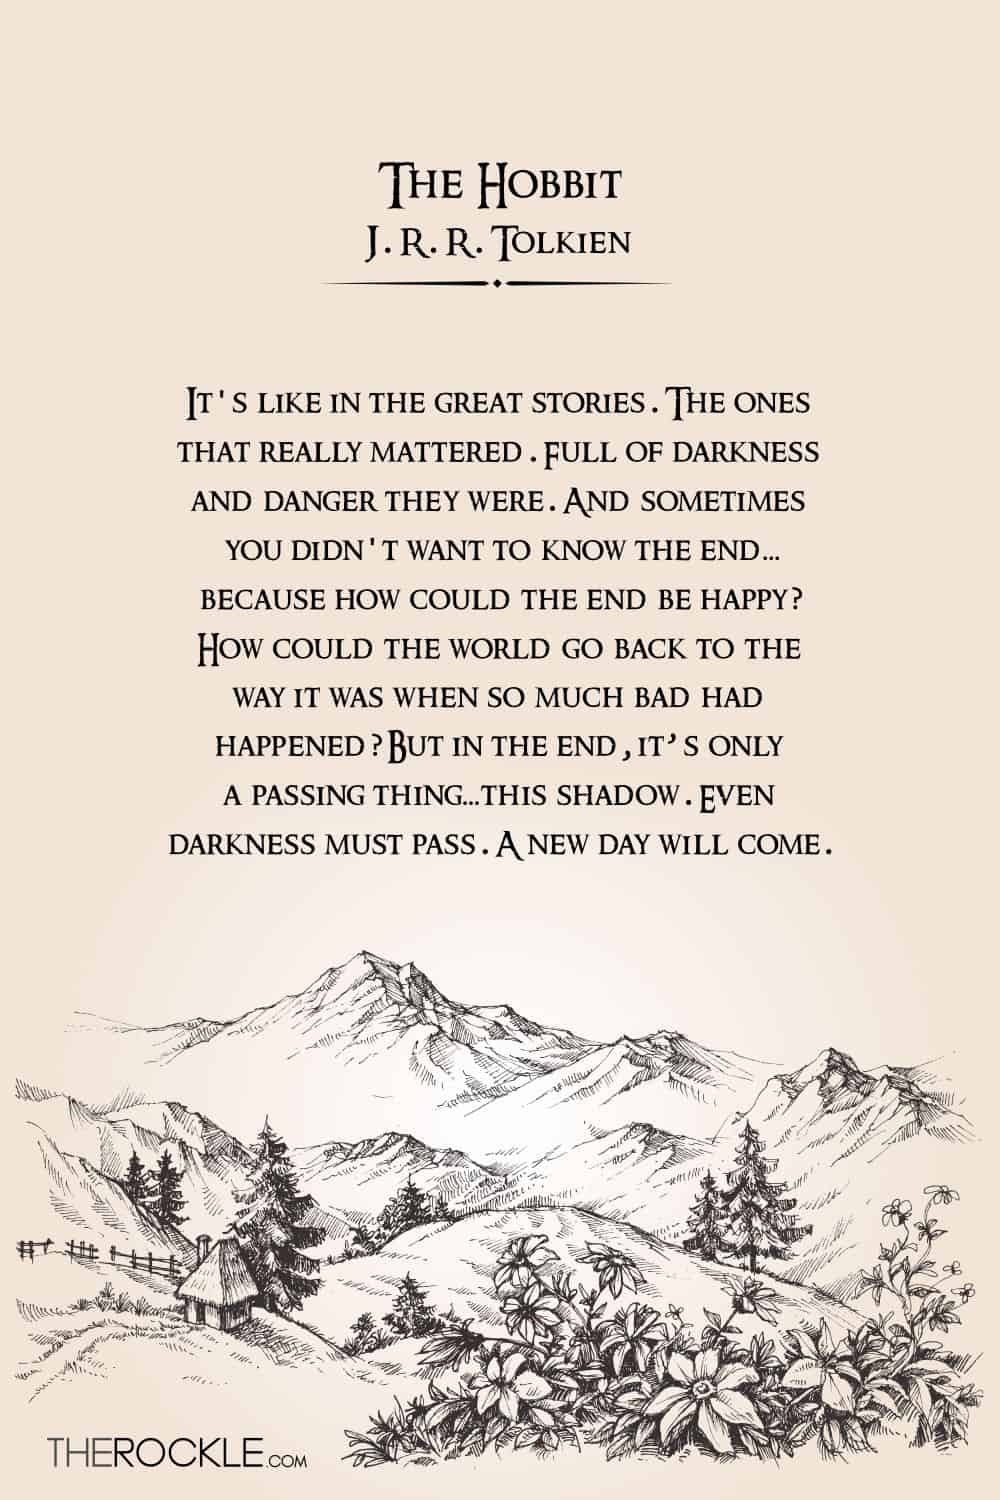 Tolkien on hope and perseverance